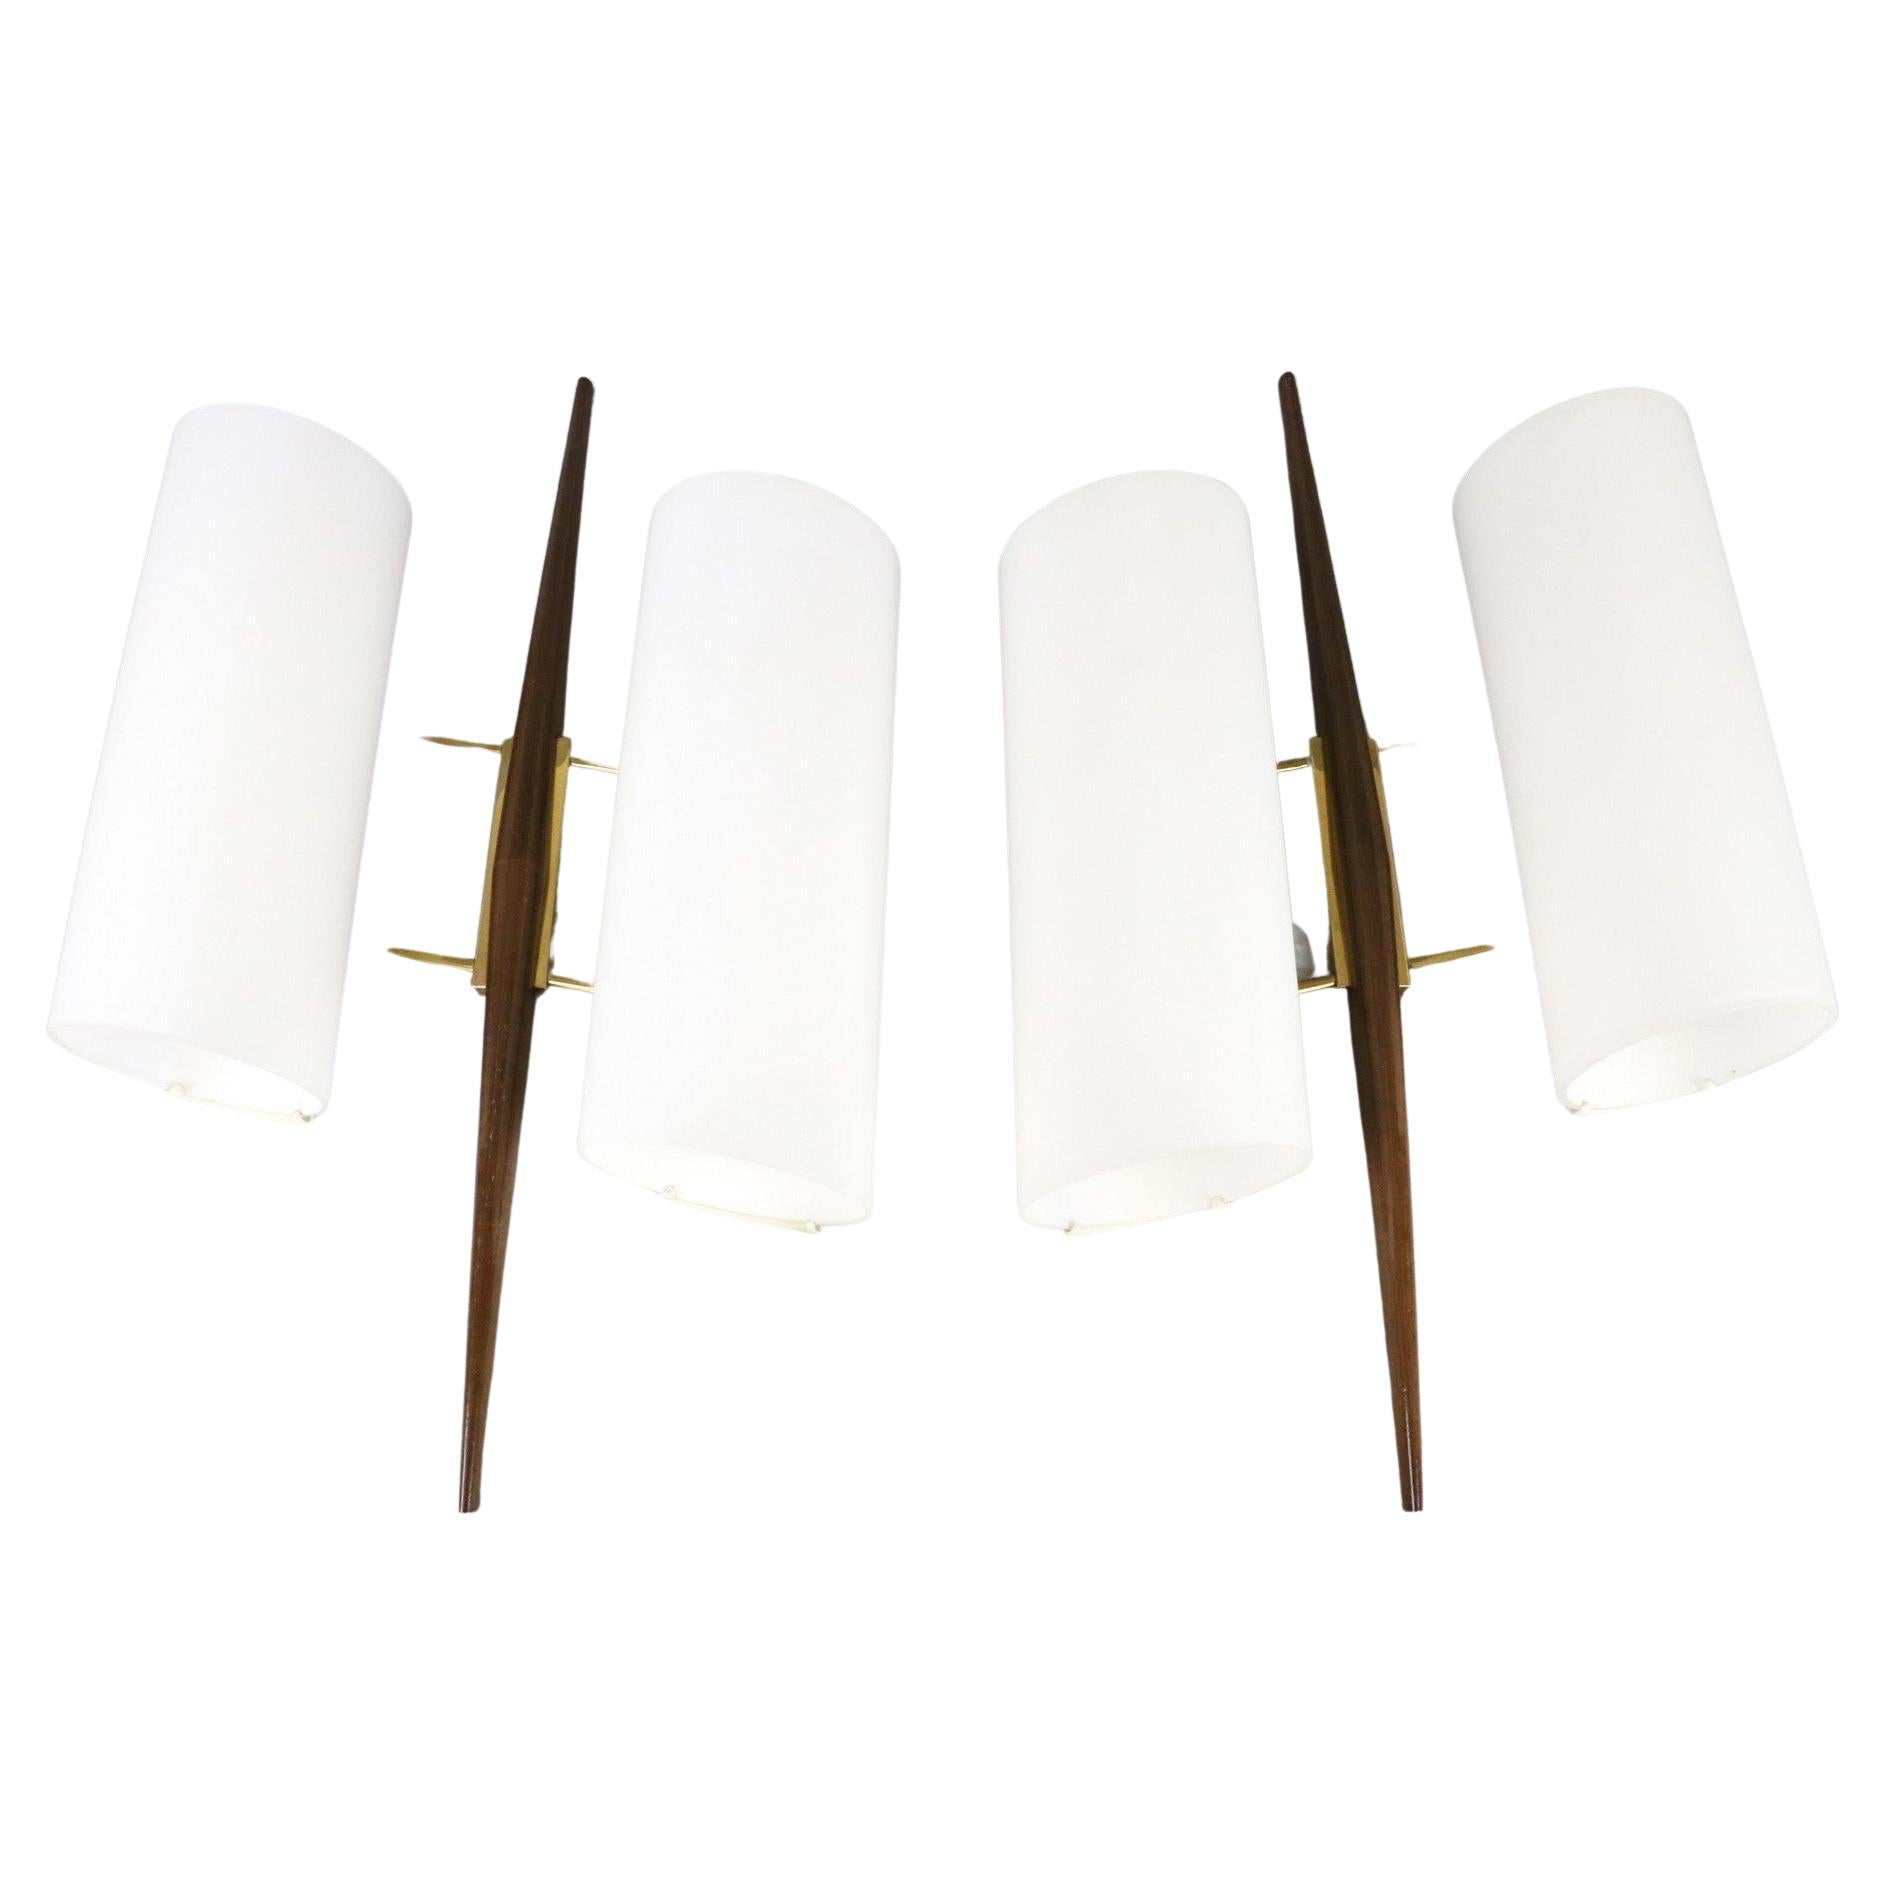 Maison Arlus, Pair of Mid-Century Modern Double lighting wall lamps, 1950s France

Beautiful and elegant pair of sconces in 1950s style. They are remarkable for their large size
In very good condition with normal wear of age.

Formal, sober and